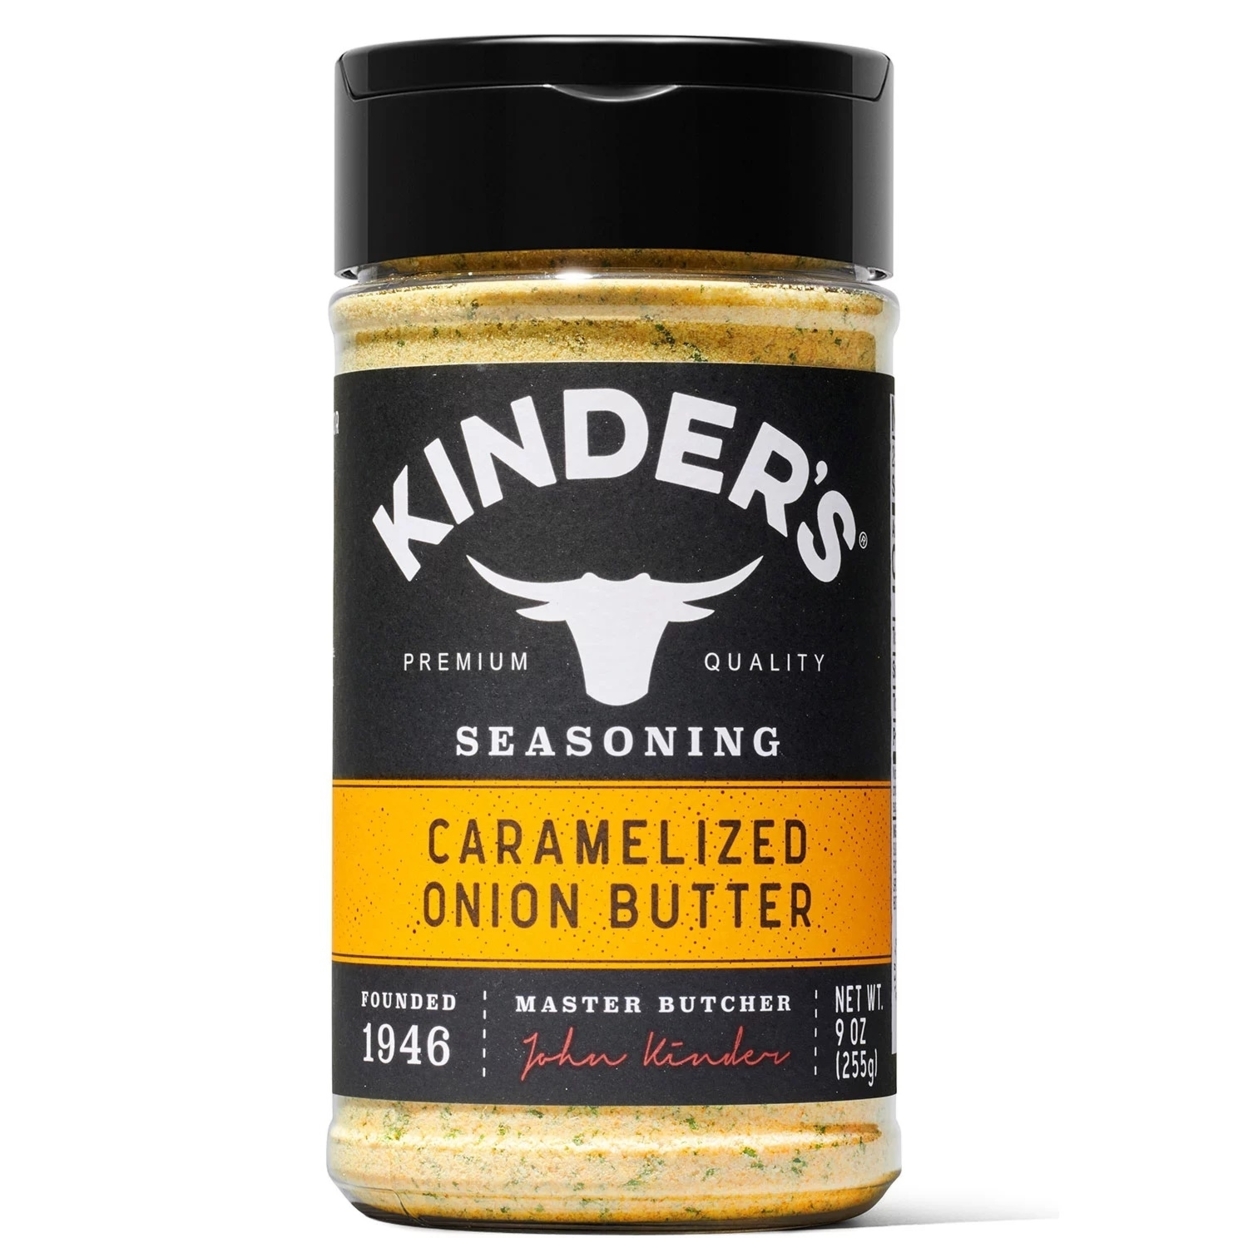 Kinder's Caramelized Onion Butter Seasoning (9 Ounce)